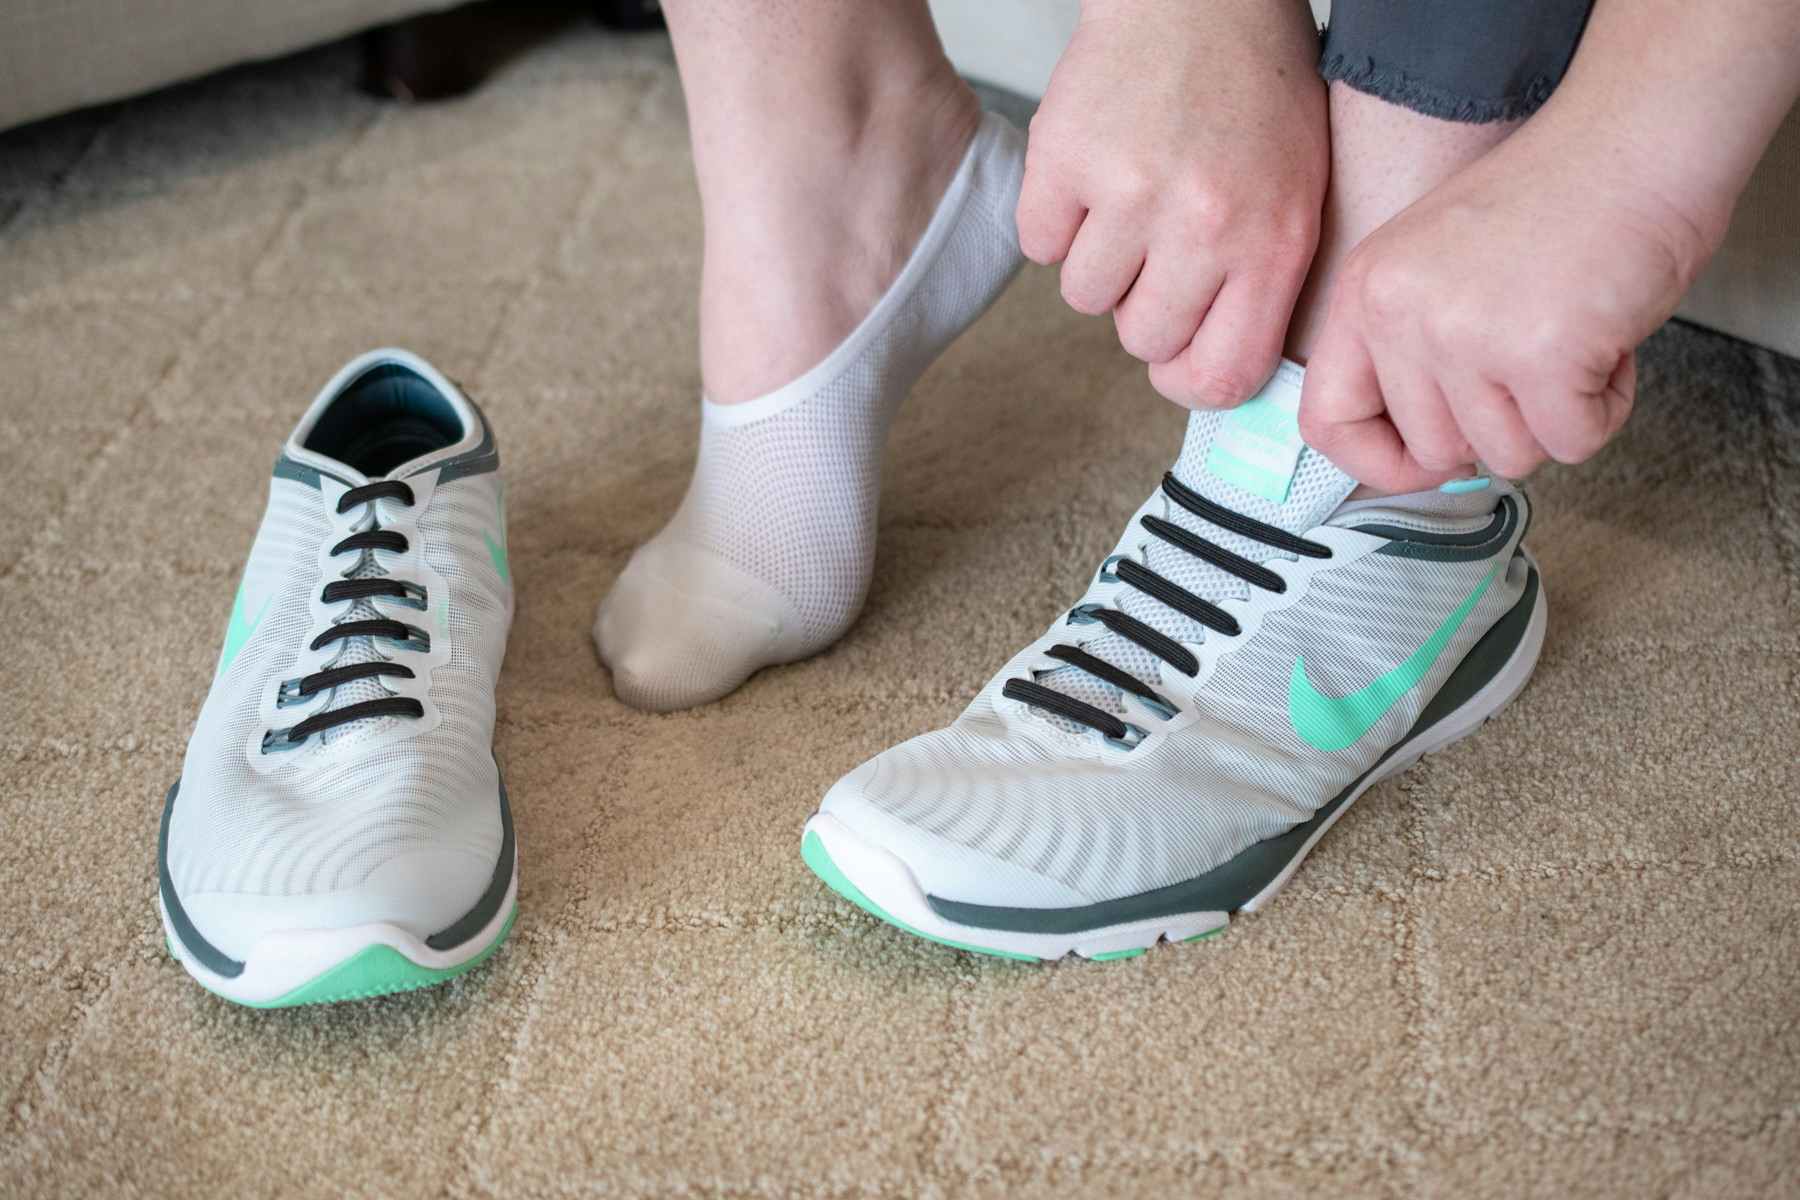 A person putting on a tennis shoe.